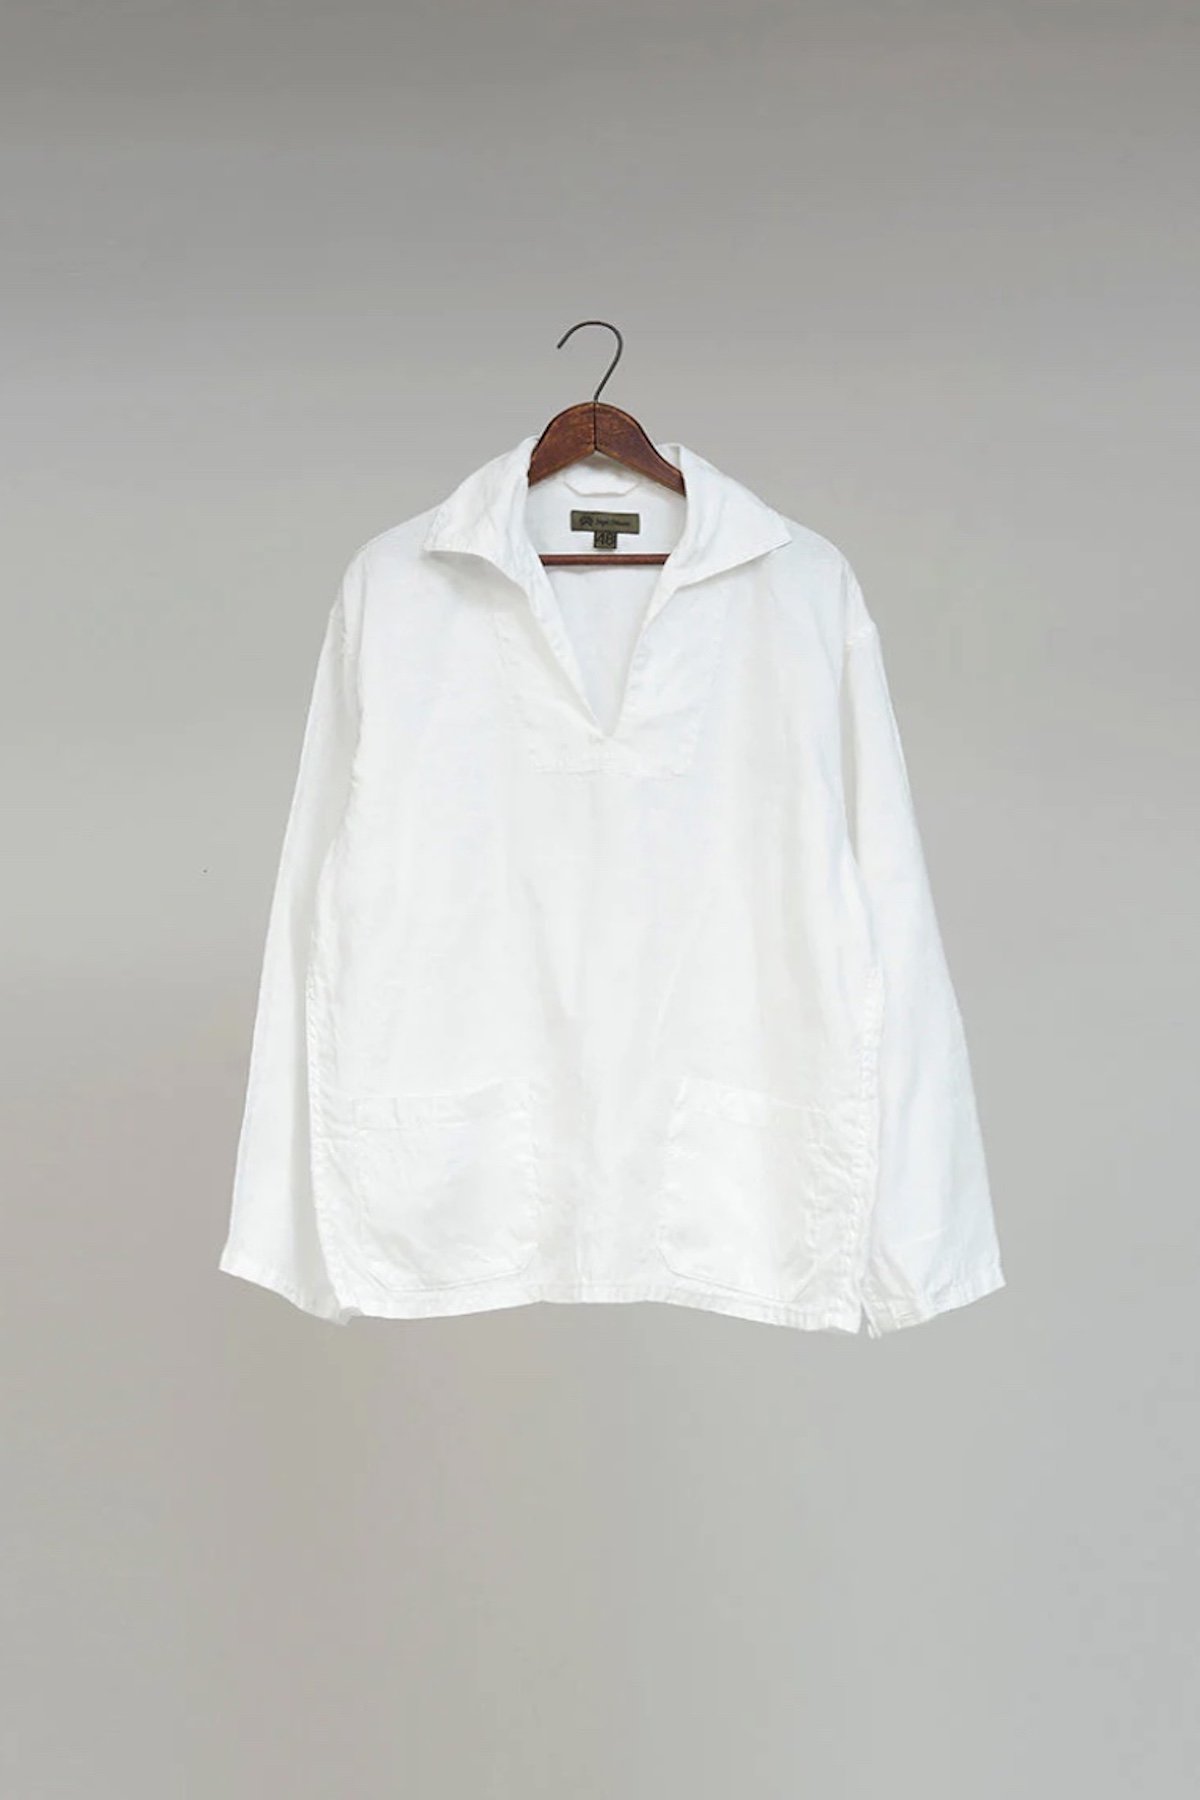 ◯ Nigel Cabourn - FRENCH PULLOVER SHIRT HEMP - OFF WHITE ...